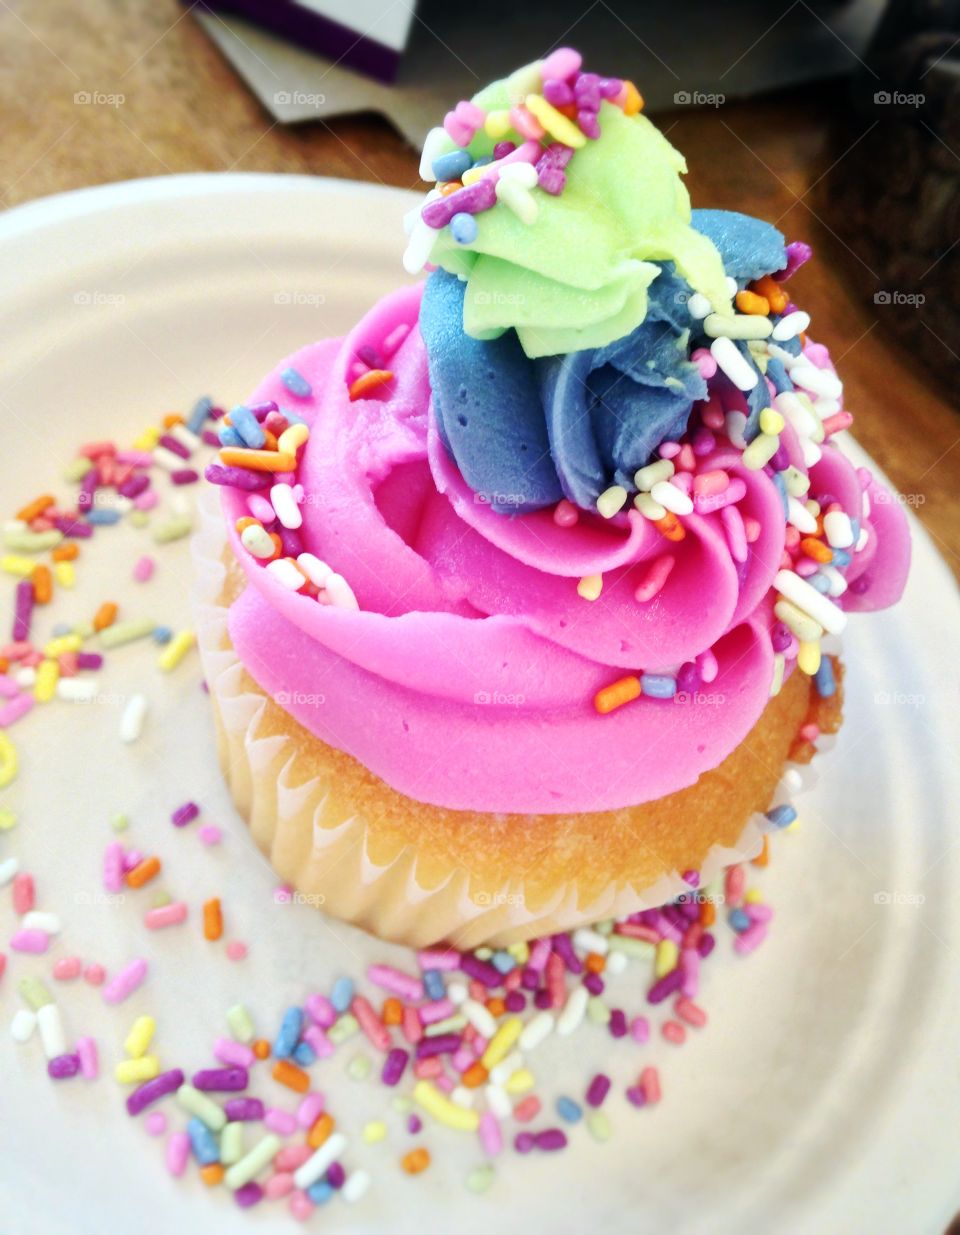 Festive cupcake . Frosted pink, blue and green cupcake with multicolored sprinkles 